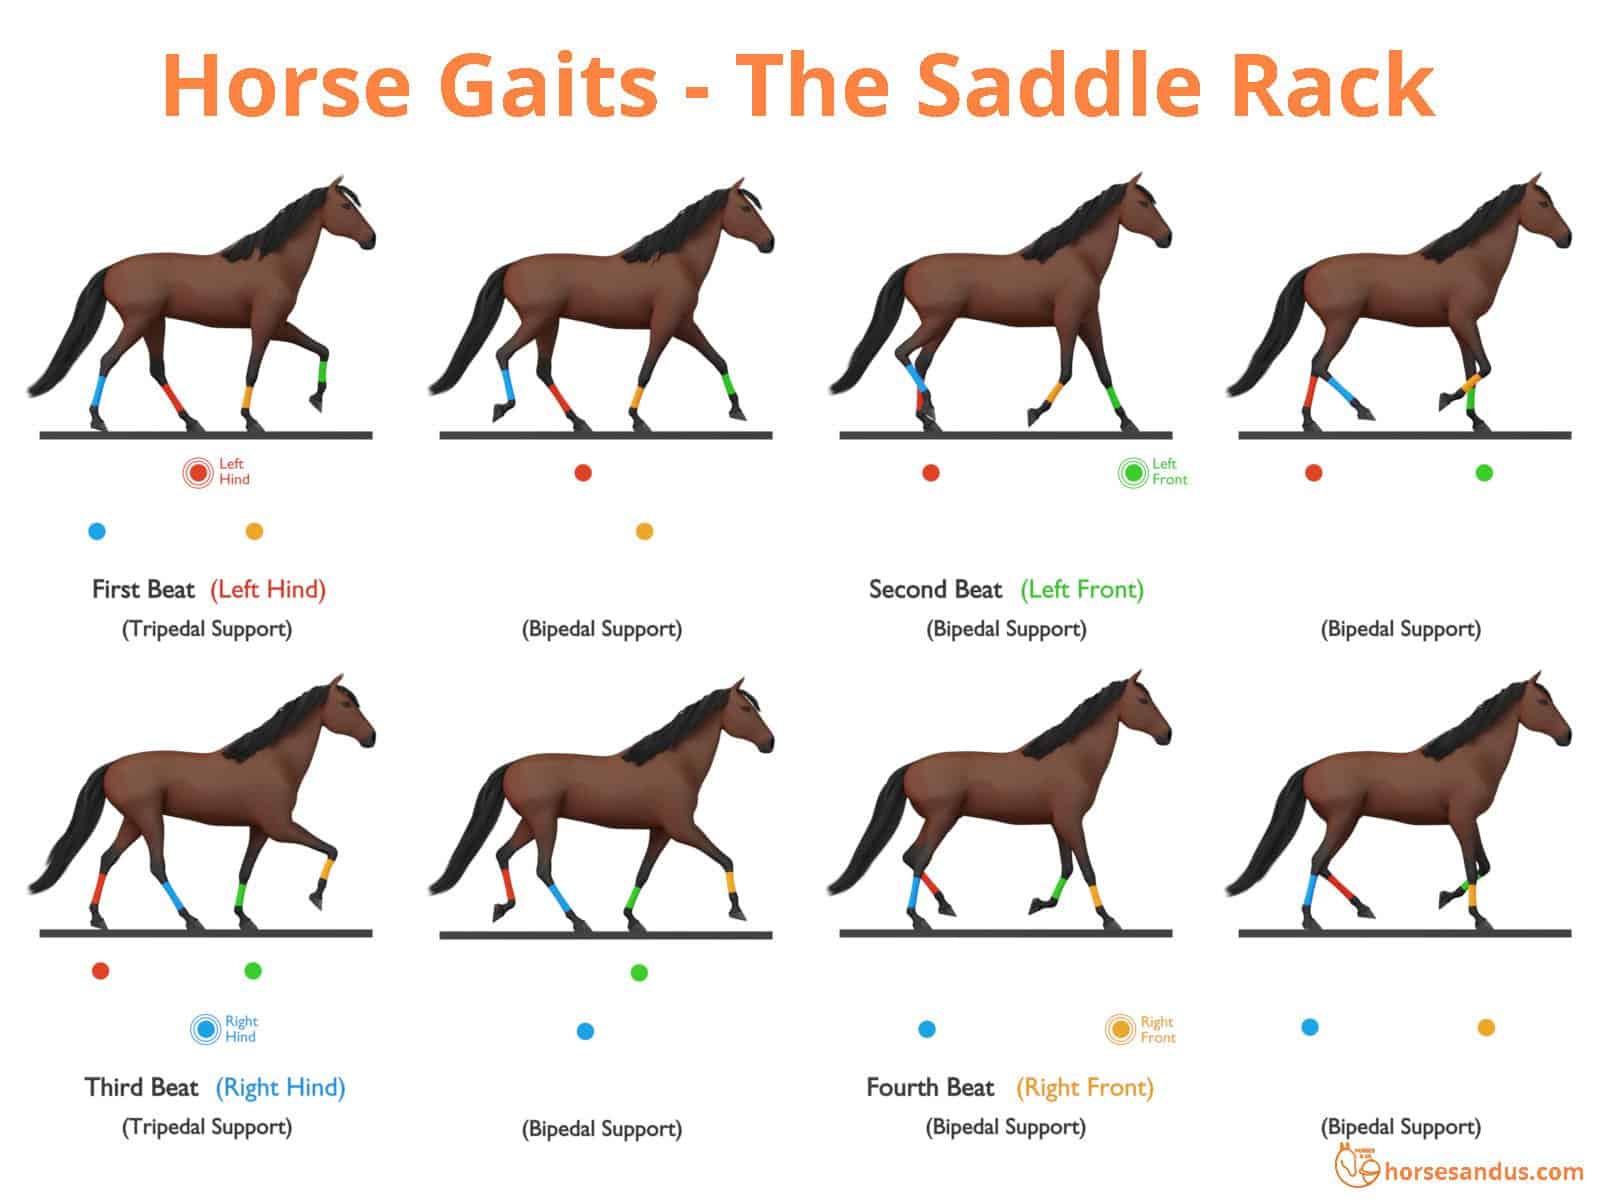 Sequence of footfalls for the Saddle Rack